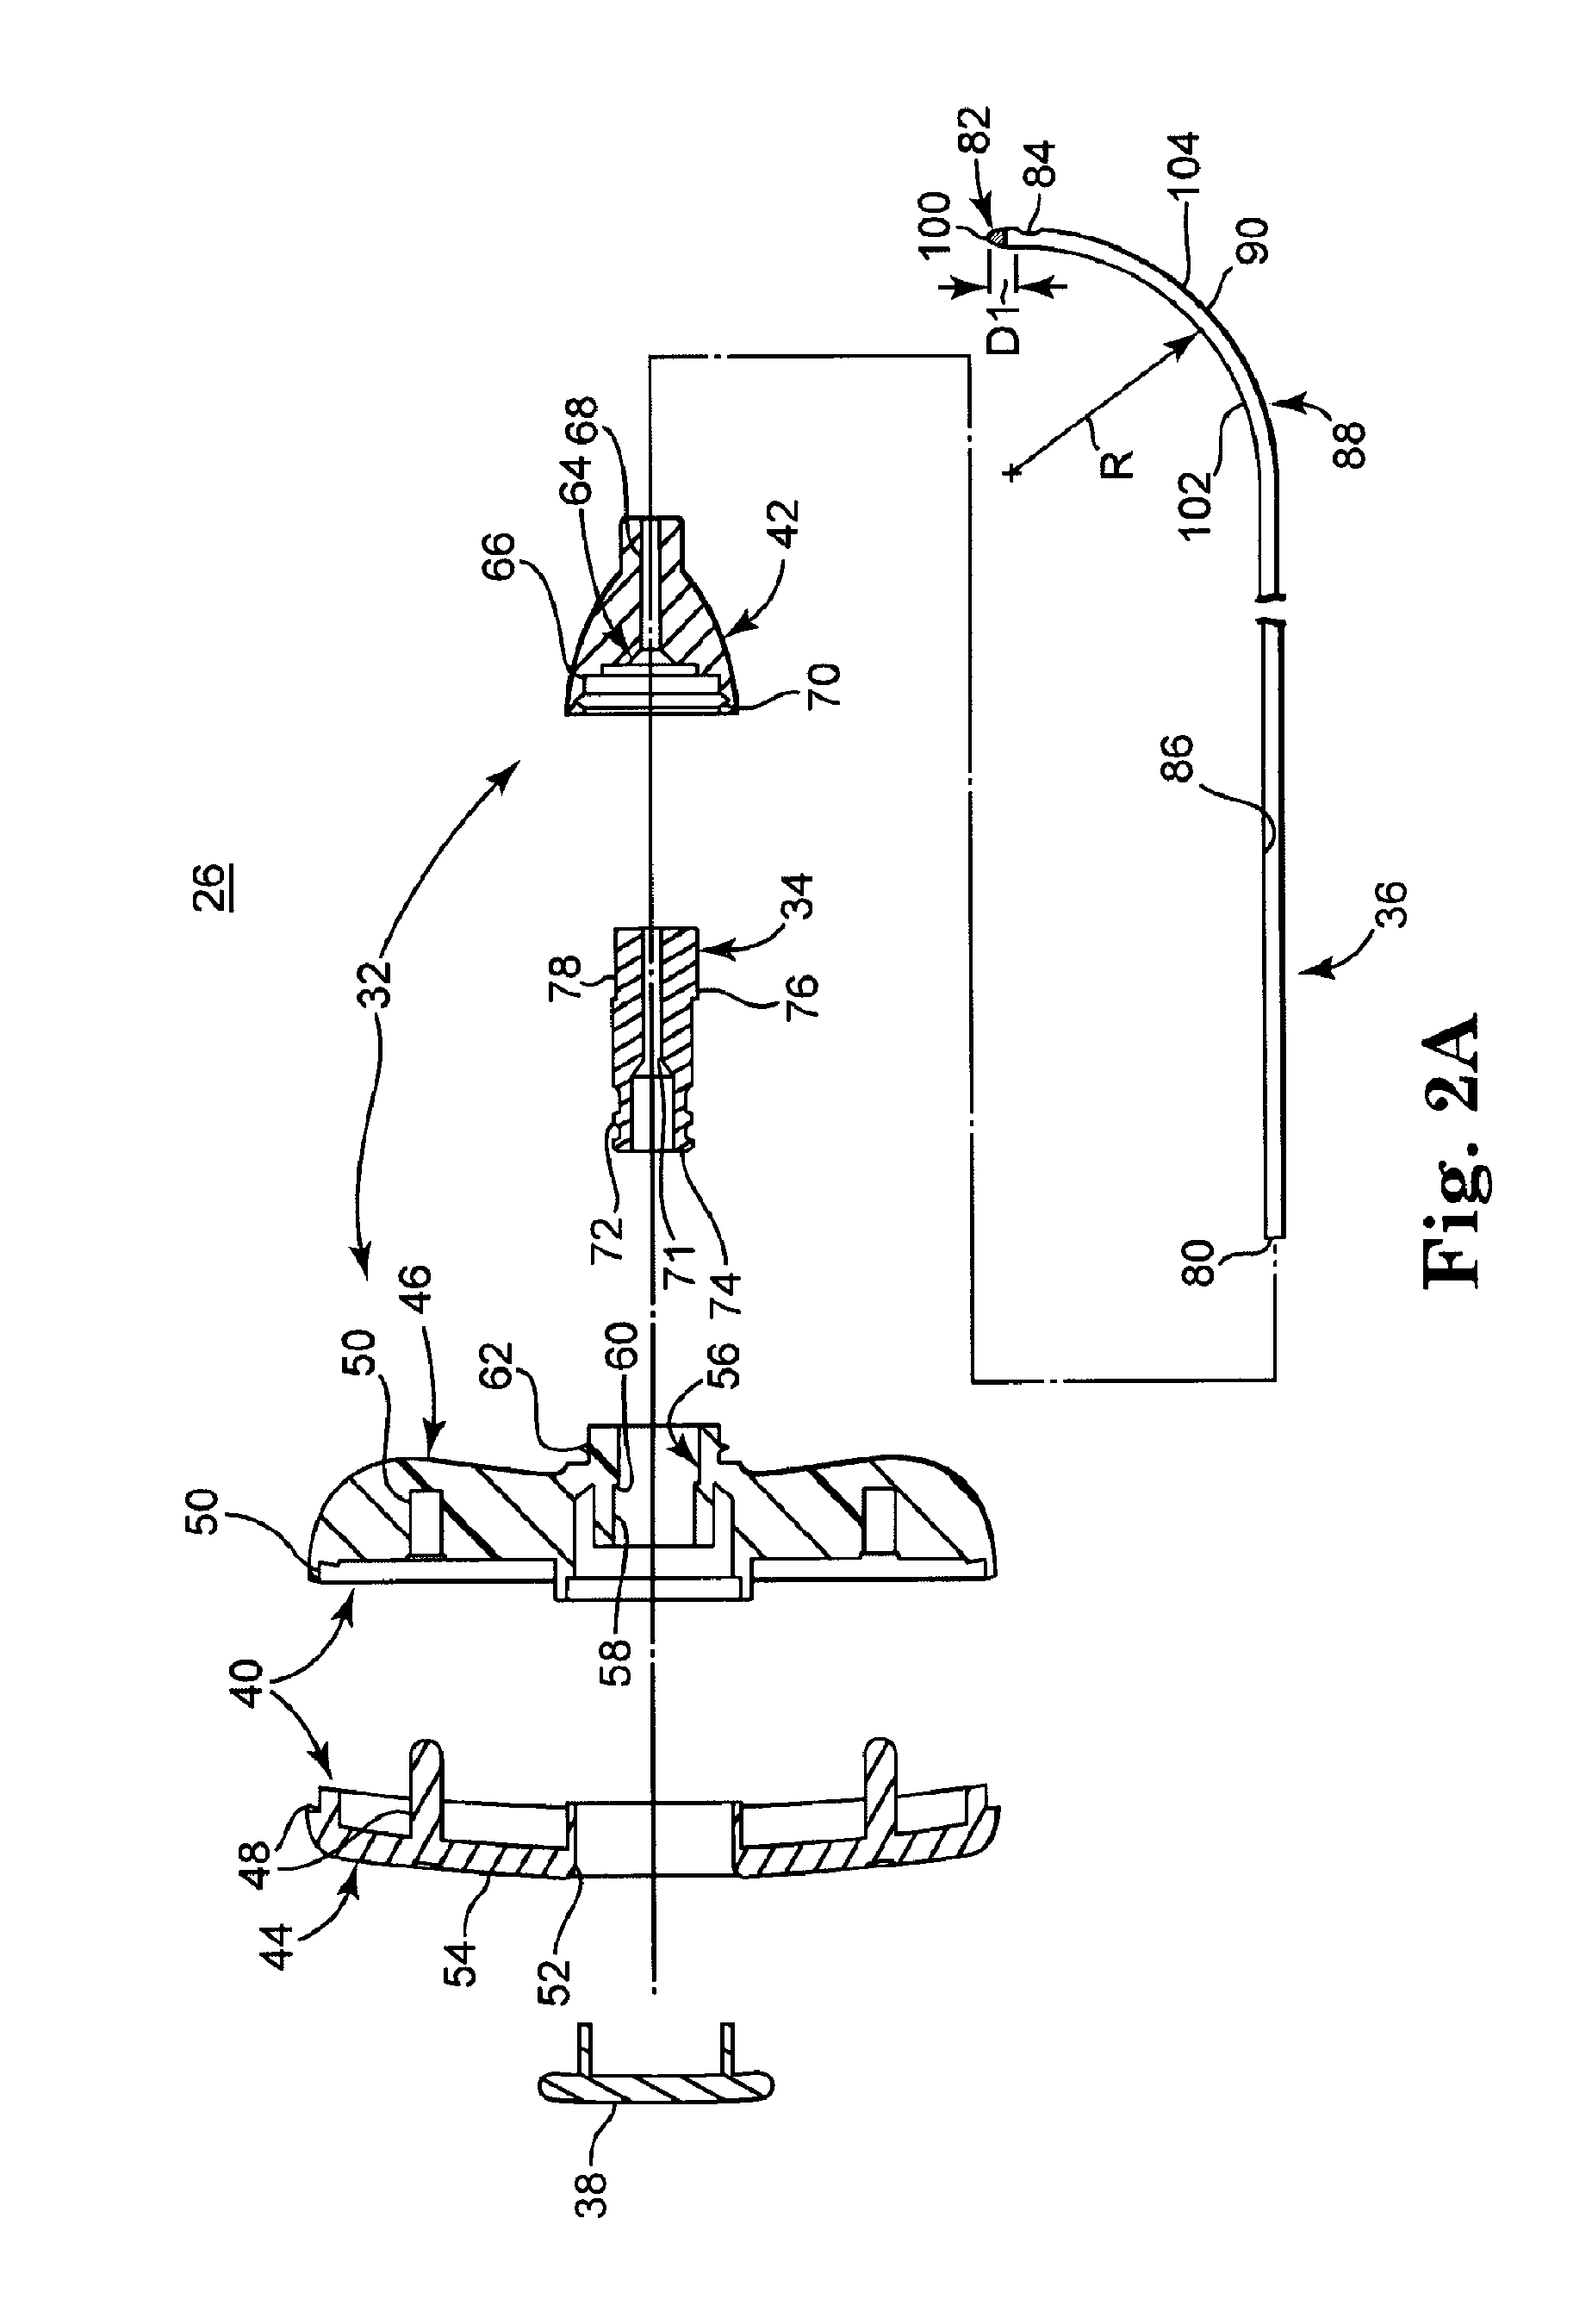 Multistate-curvature device and method for delivering a curable material into bone